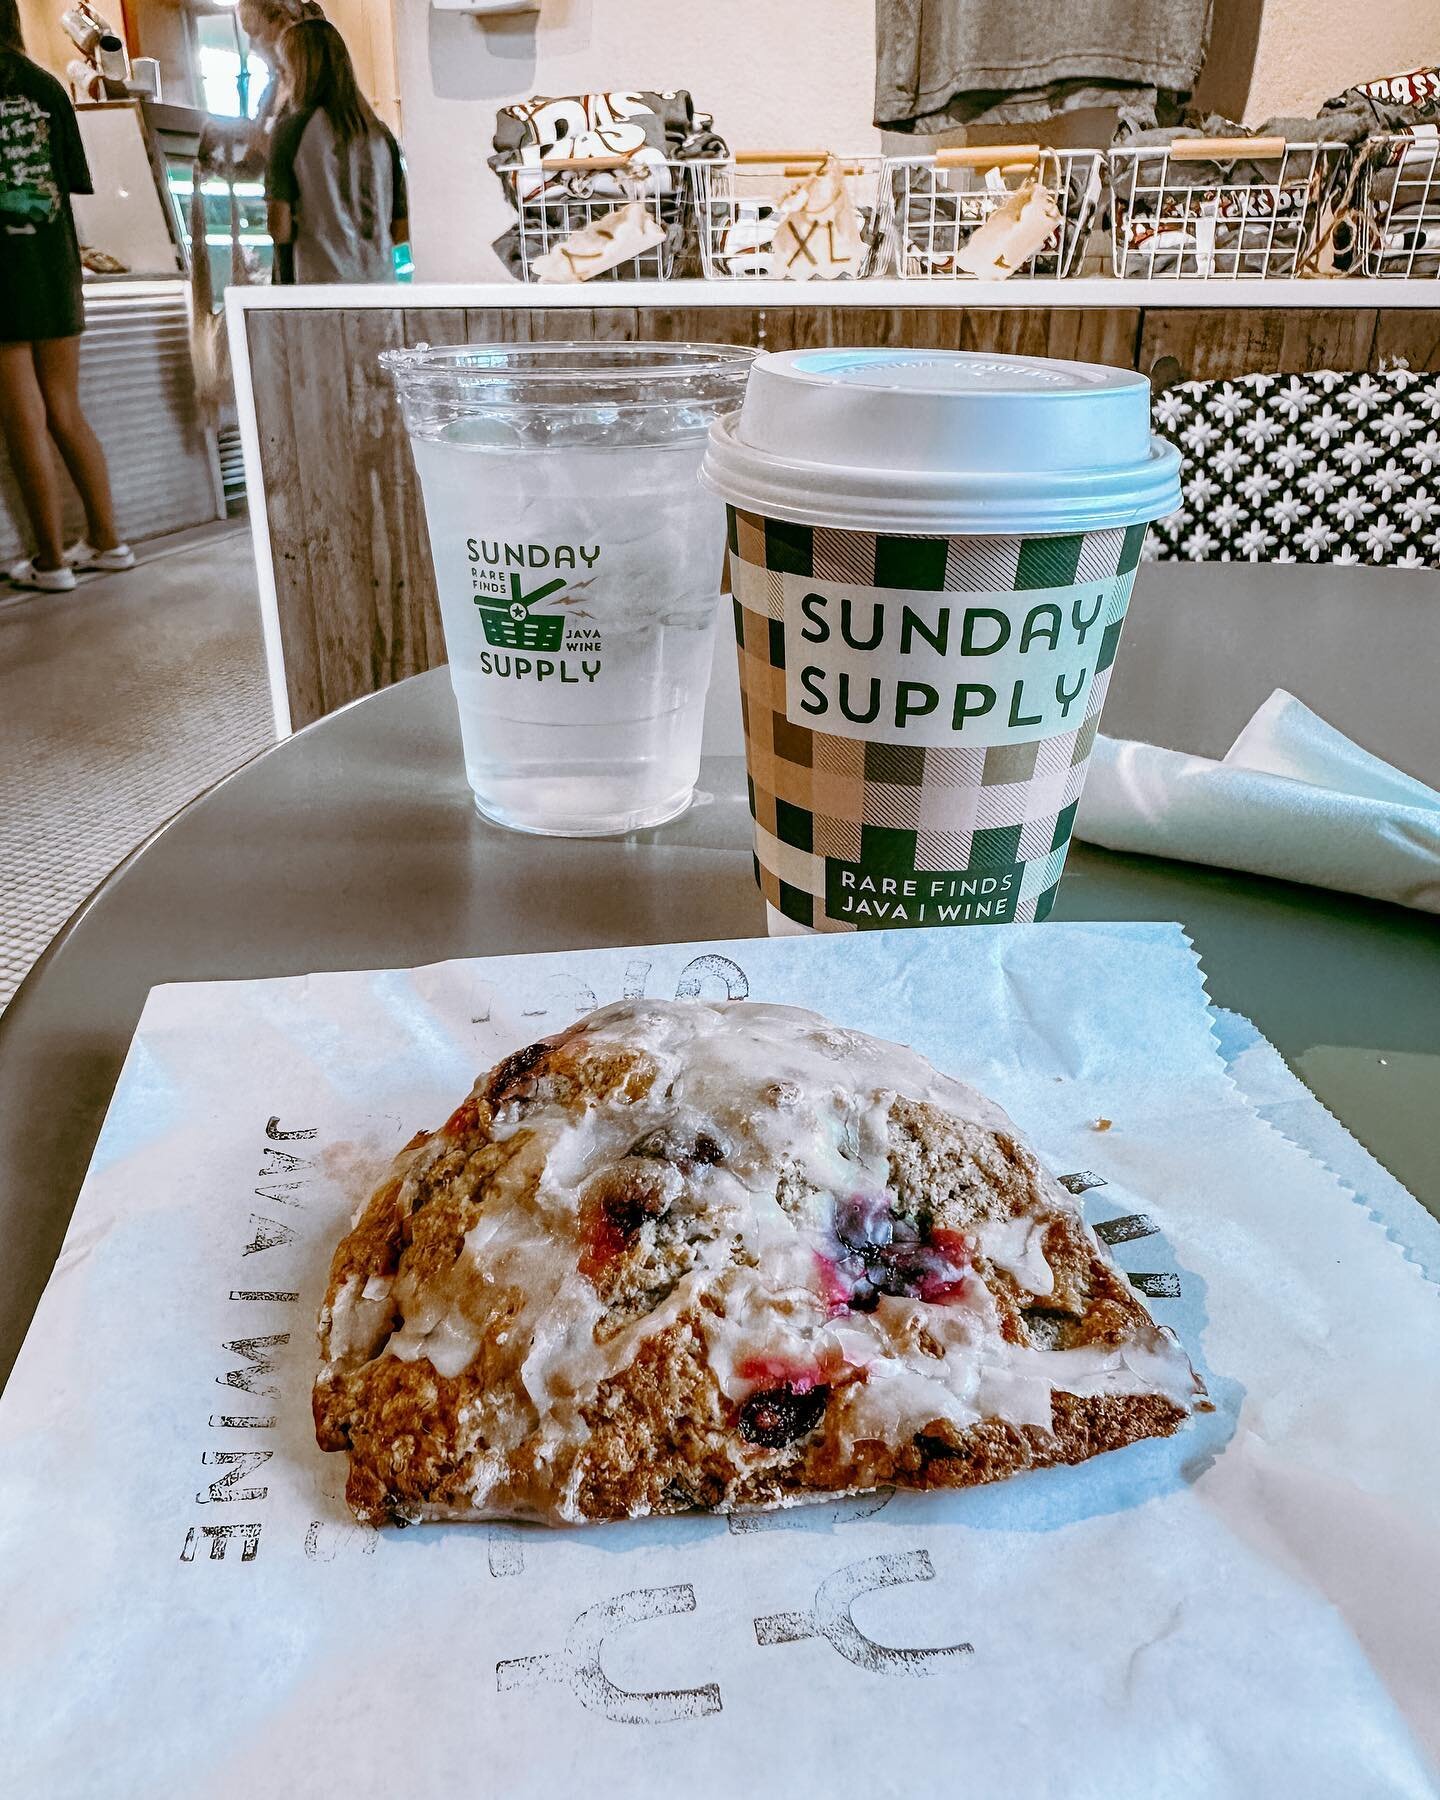 I&rsquo;m not one for posting food pics as we all see endless posts of what people are eating for lunch. So pls consider this a public service announcement. 

If ever in Fredericksburg, stop by @sundaysupplytx for a blueberry scone. The opposite of a